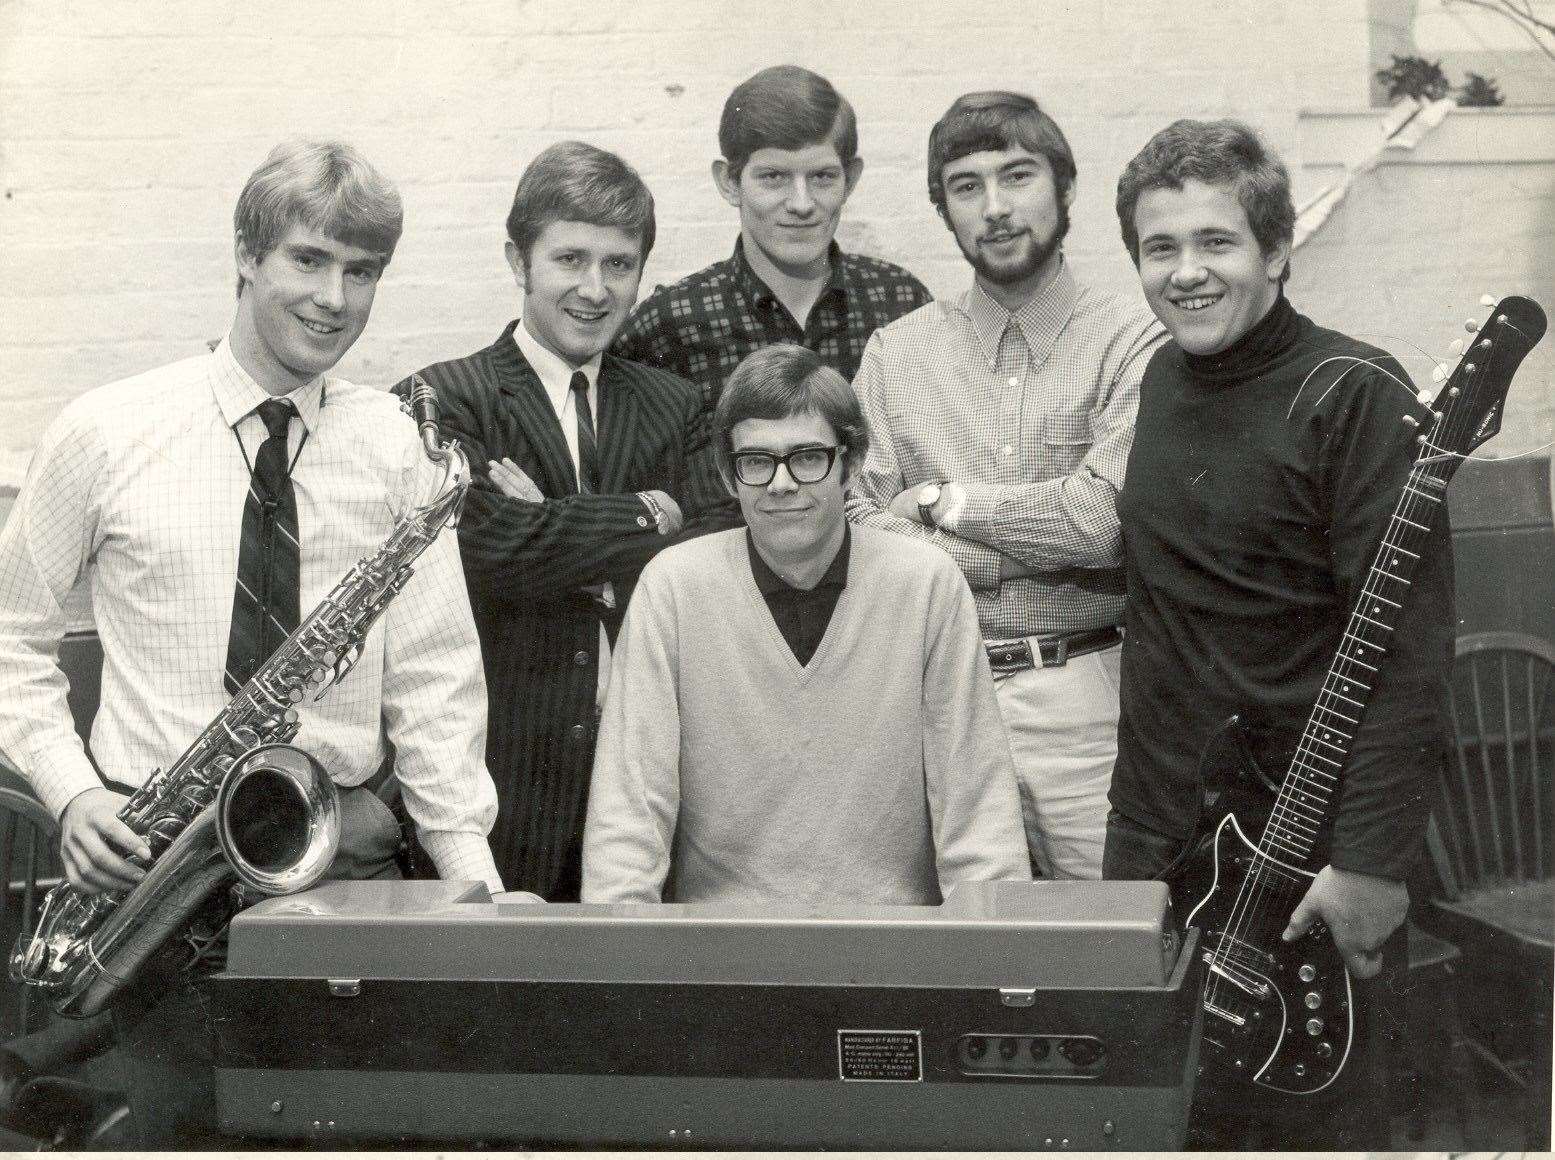 One of the changing line-ups for the Poor Boys Soul Band, from left Dick Naylor, Phil Bingham, Dave Hills, Nigel Archer, Bob Lamb and Mark Pentecost